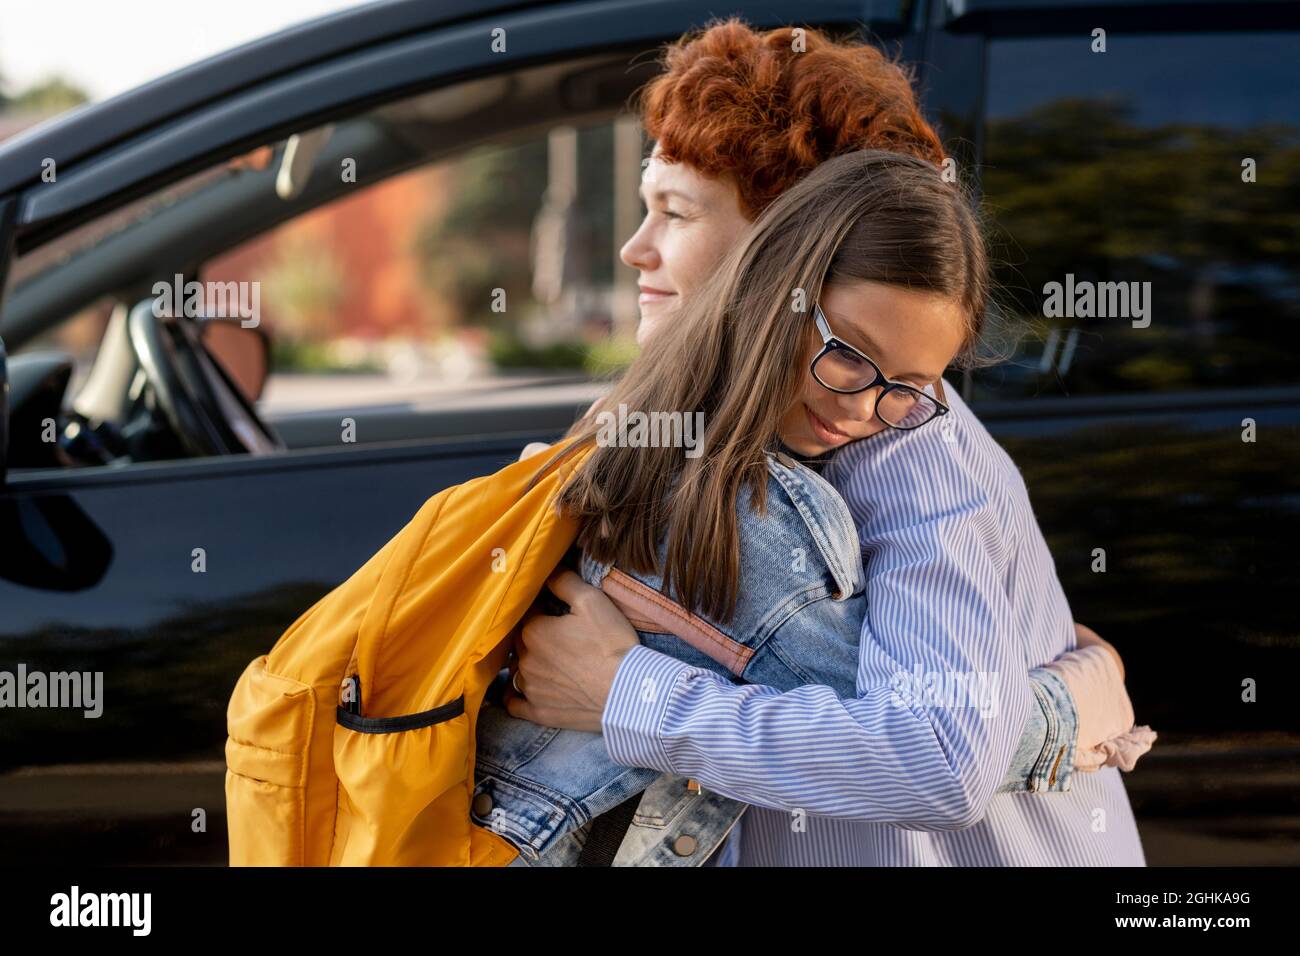 Mother and daughter standing in embrace against car outdoors in the morning Stock Photo